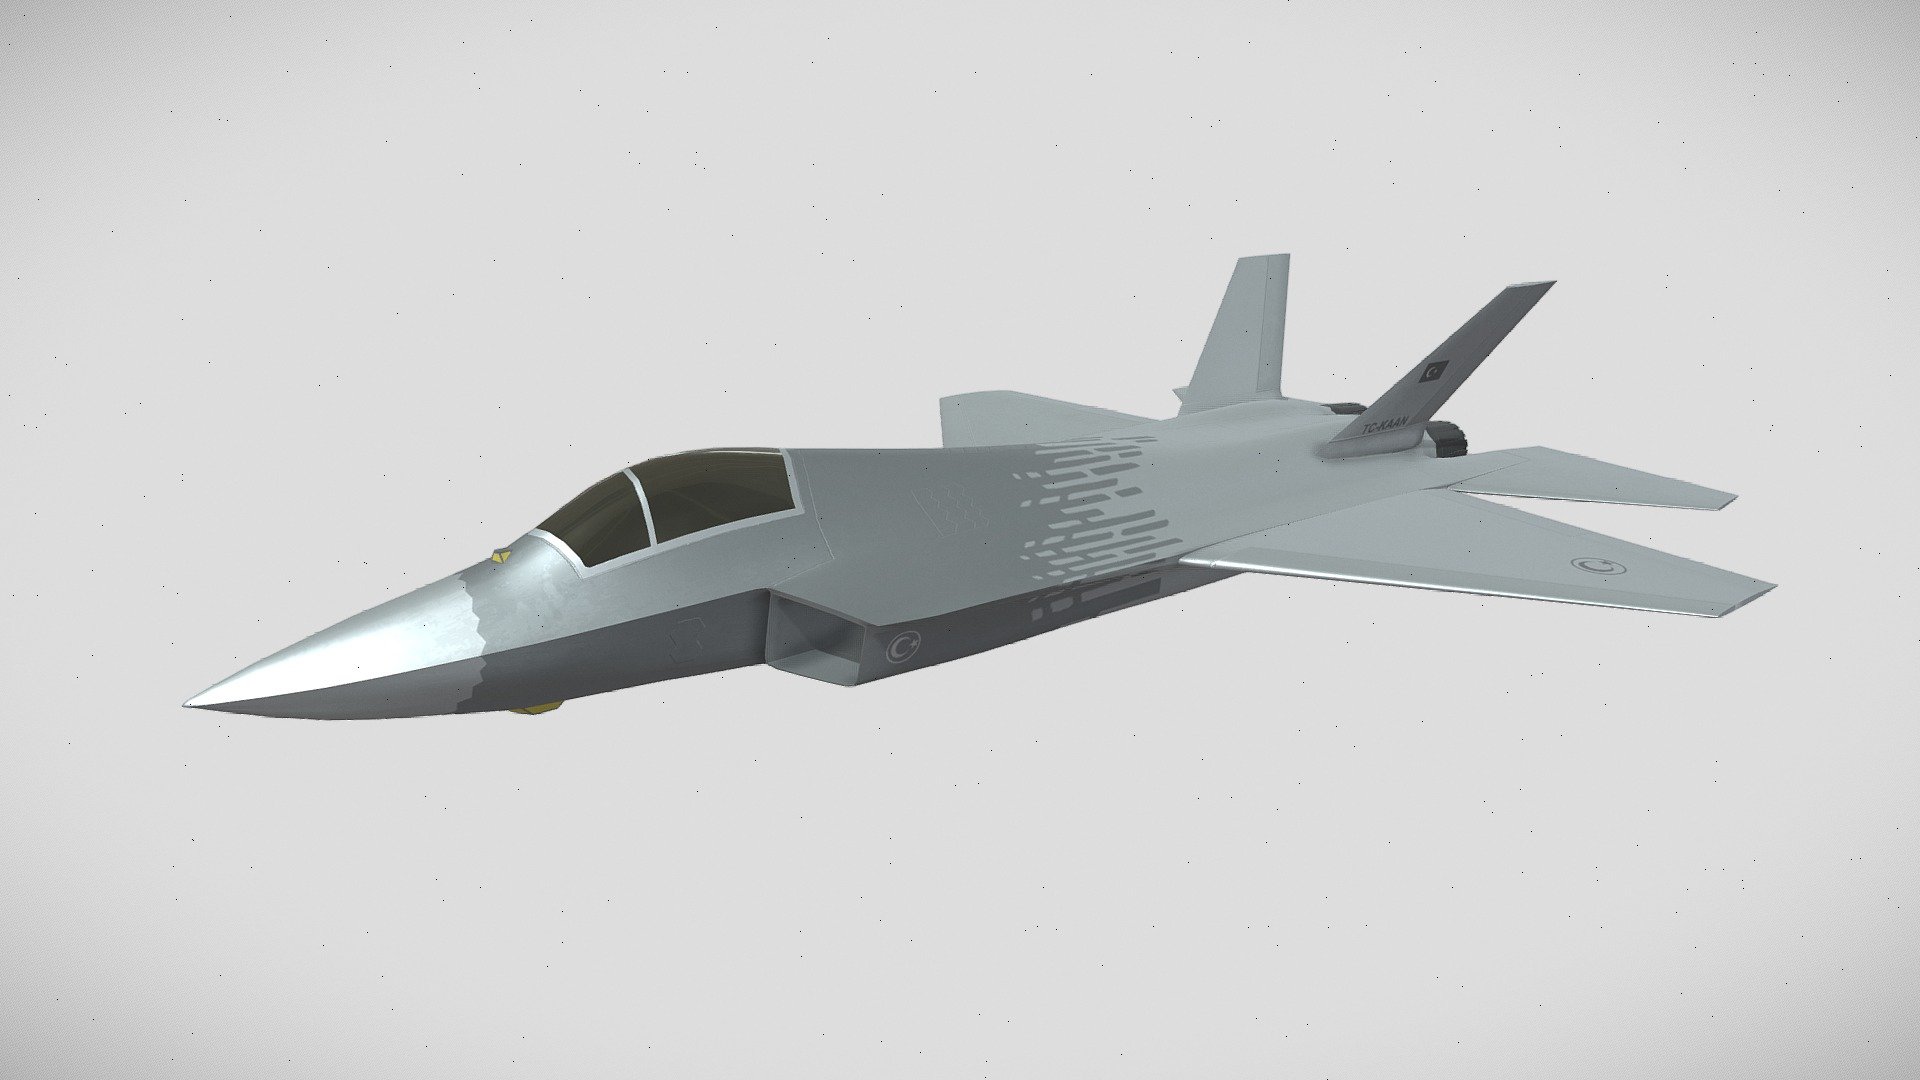 The Turkish Aerospace KAAN, also known as TF-X, MMU(Milli Muharip Uçak), is a fifth-generation stealth twin-engine all-weather air superiority fighter in development by Turkish Aerospace (TA) and BAE Systems as its sub-contractor. The aircraft is planned to replace F-16 Fighting Falcons of the Turkish Air Force and to be exported to foreign nations.

I made this model by using Blender and Substance Painter. I’ll continue to improve the model.

For more: https://cemgurbuz.com/kaan

Previous Version: https://skfb.ly/oKPnL - Turkish Aerospace KAAN - 3D model by Cem Gürbüz (@cemgurbuz) 3d model